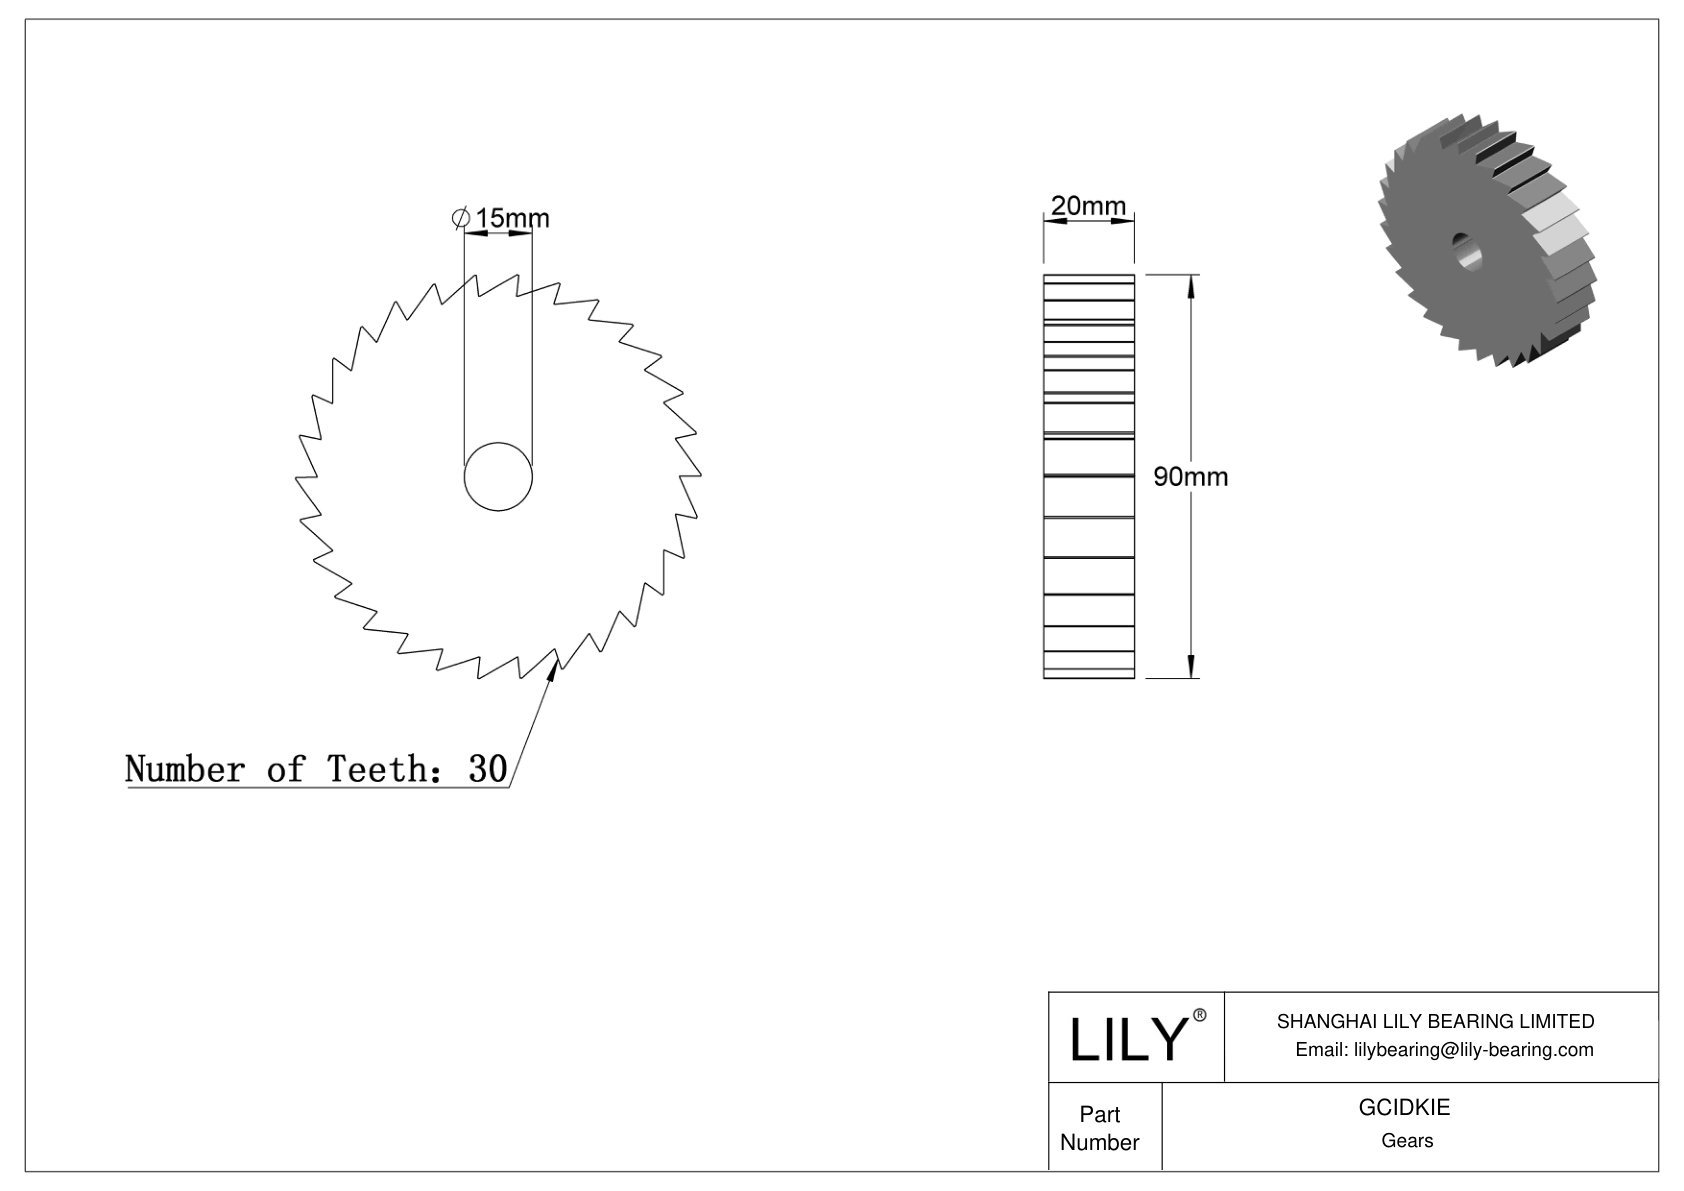 GCIDKIE Gears cad drawing